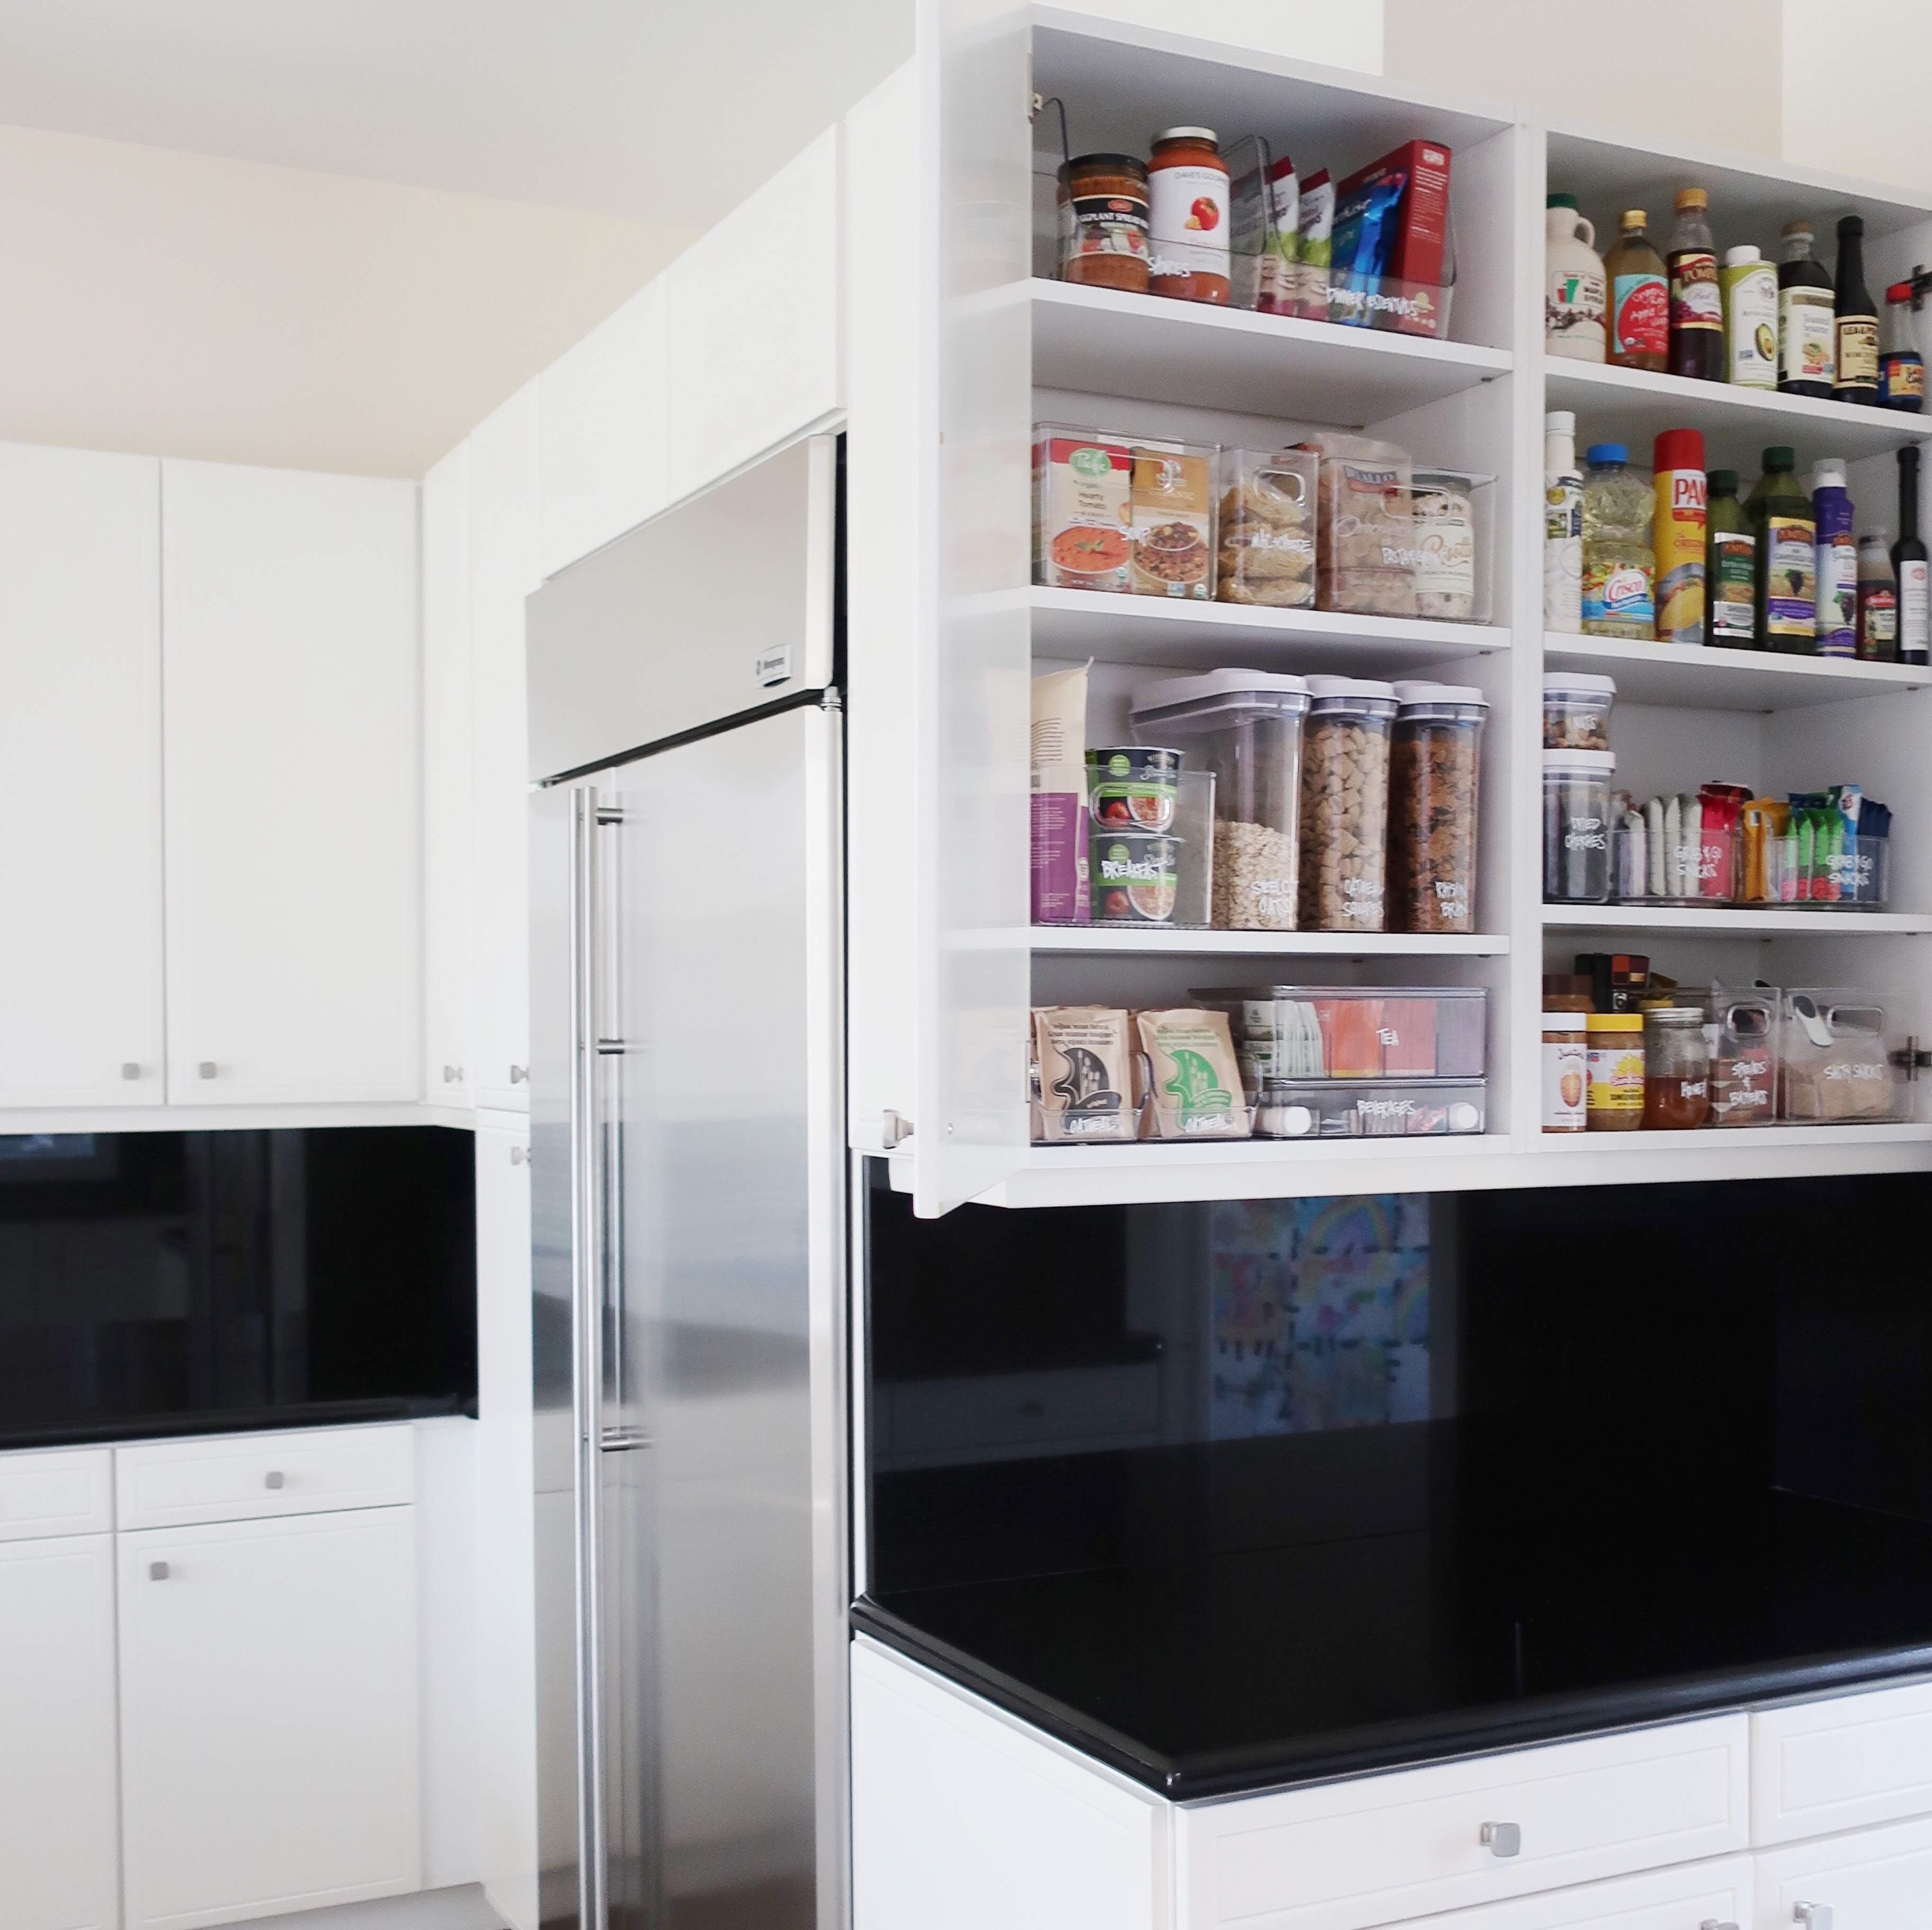 How I Organize My Upper Cabinet Pantry